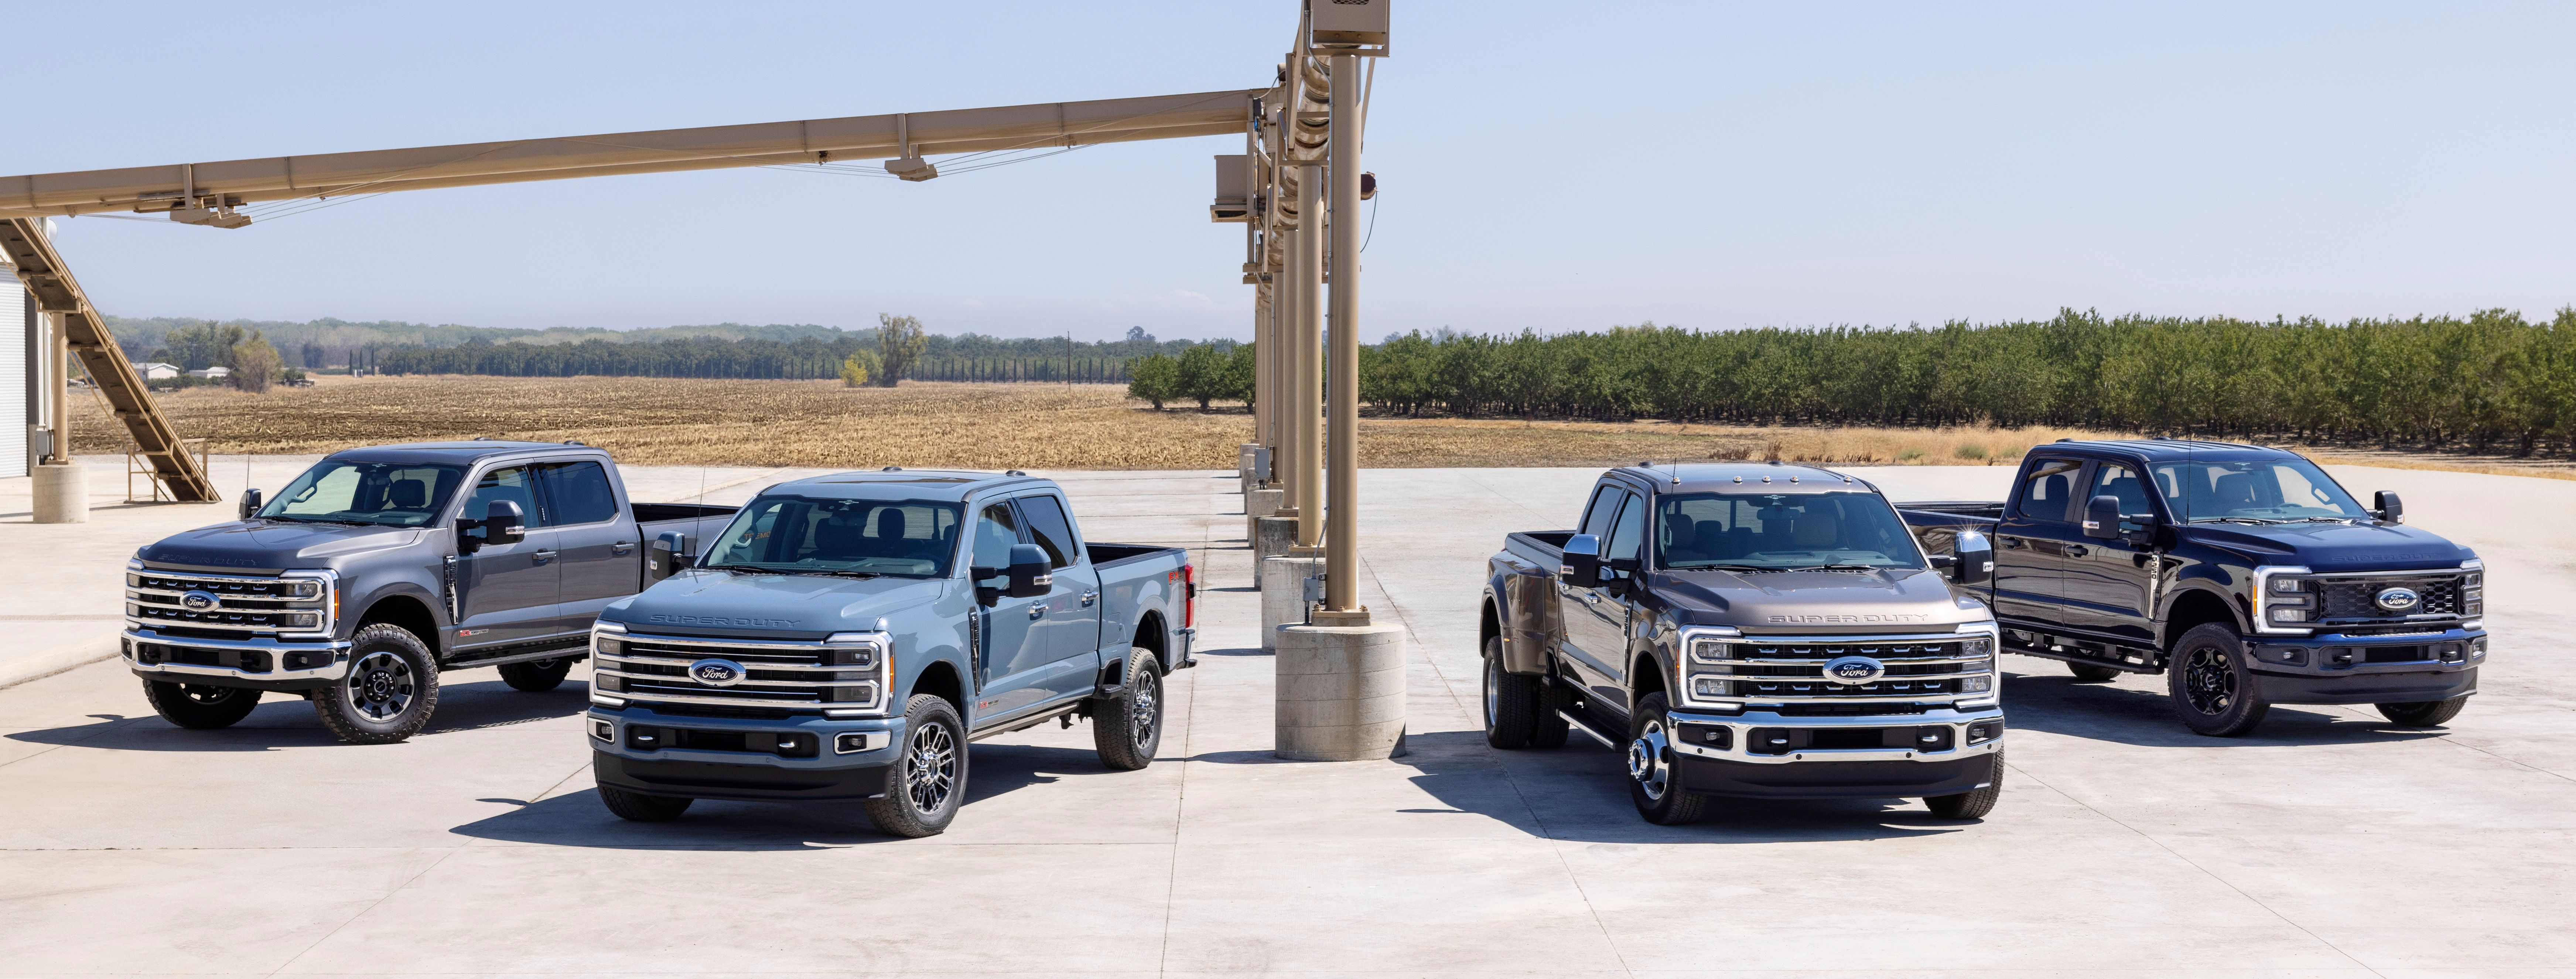 2023 Ford Super Duty Family Featuring Full Range Front View